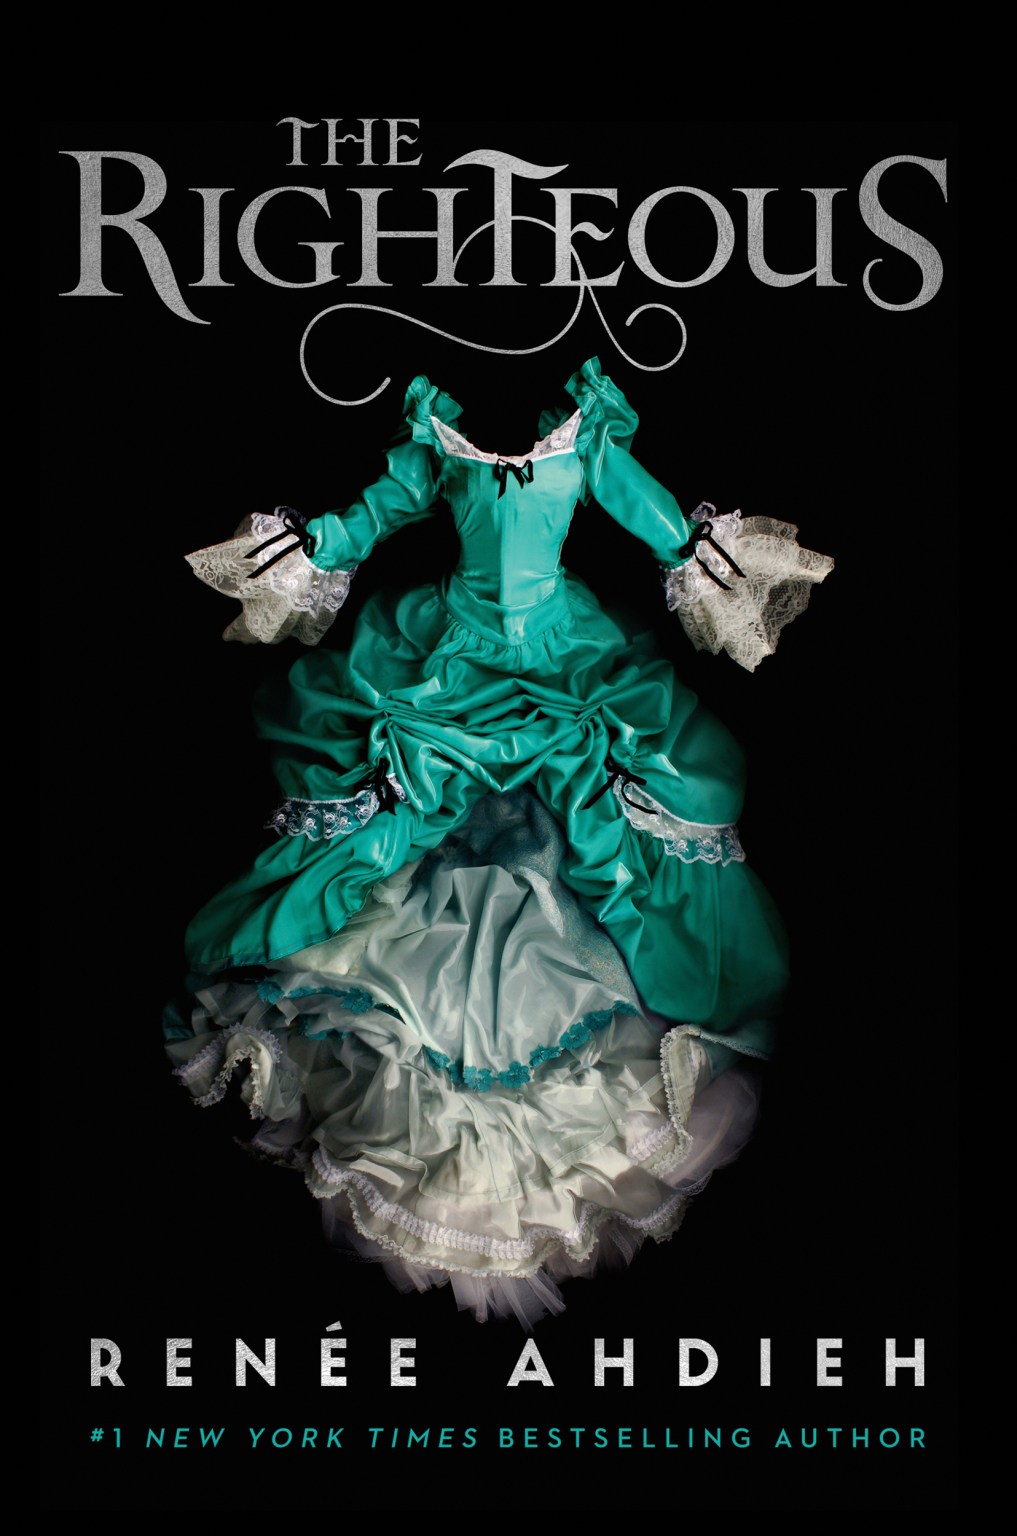 Cover for Renée Adhieh's 'The Righteous'which features the title on top, a green and white period dress in the middle, and Ahdieh's name on the bottom. All against a pitch black background.